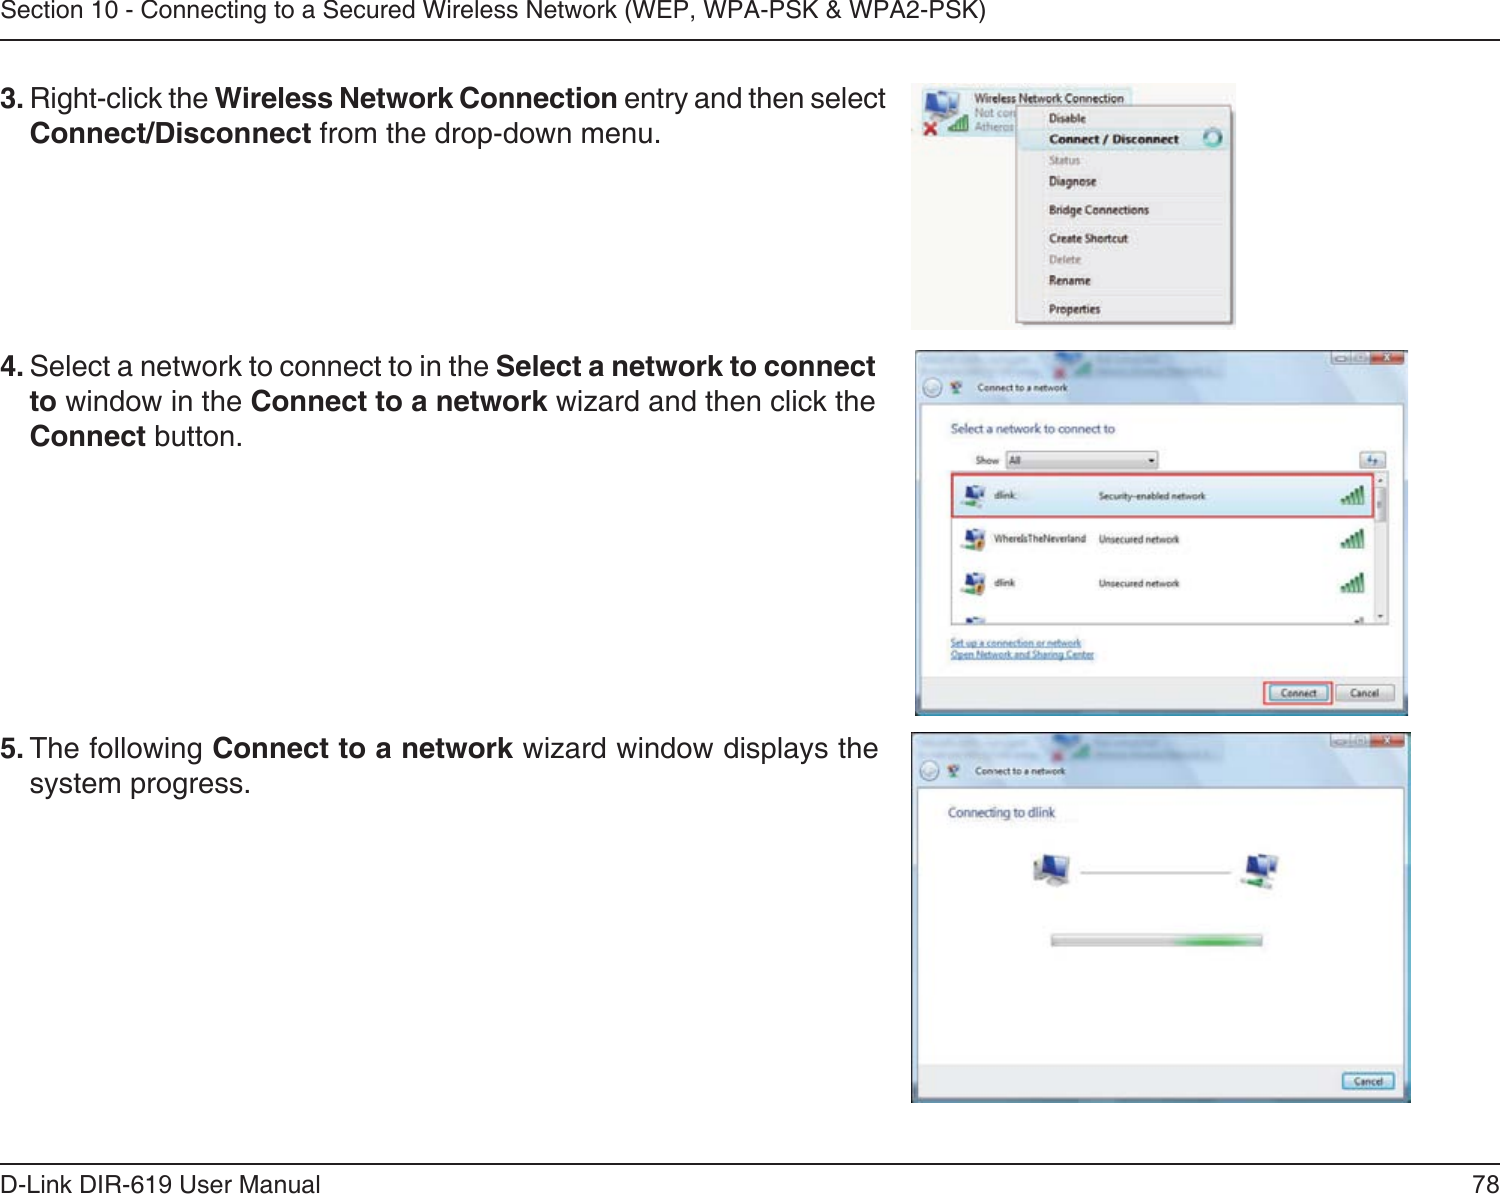 78D-Link DIR-619 User ManualSection 10 - Connecting to a Secured Wireless Network (WEP, WPA-PSK &amp; WPA2-PSK)4. Select a network to connect to in the Select a network to connectto window in the Connect to a network wizard and then click theConnect button. 5. The following Connect to a network wizard window displays thesystem progress. 3. Right-click the Wireless Network Connection entry and then selectConnect/Disconnect from the drop-down menu. 